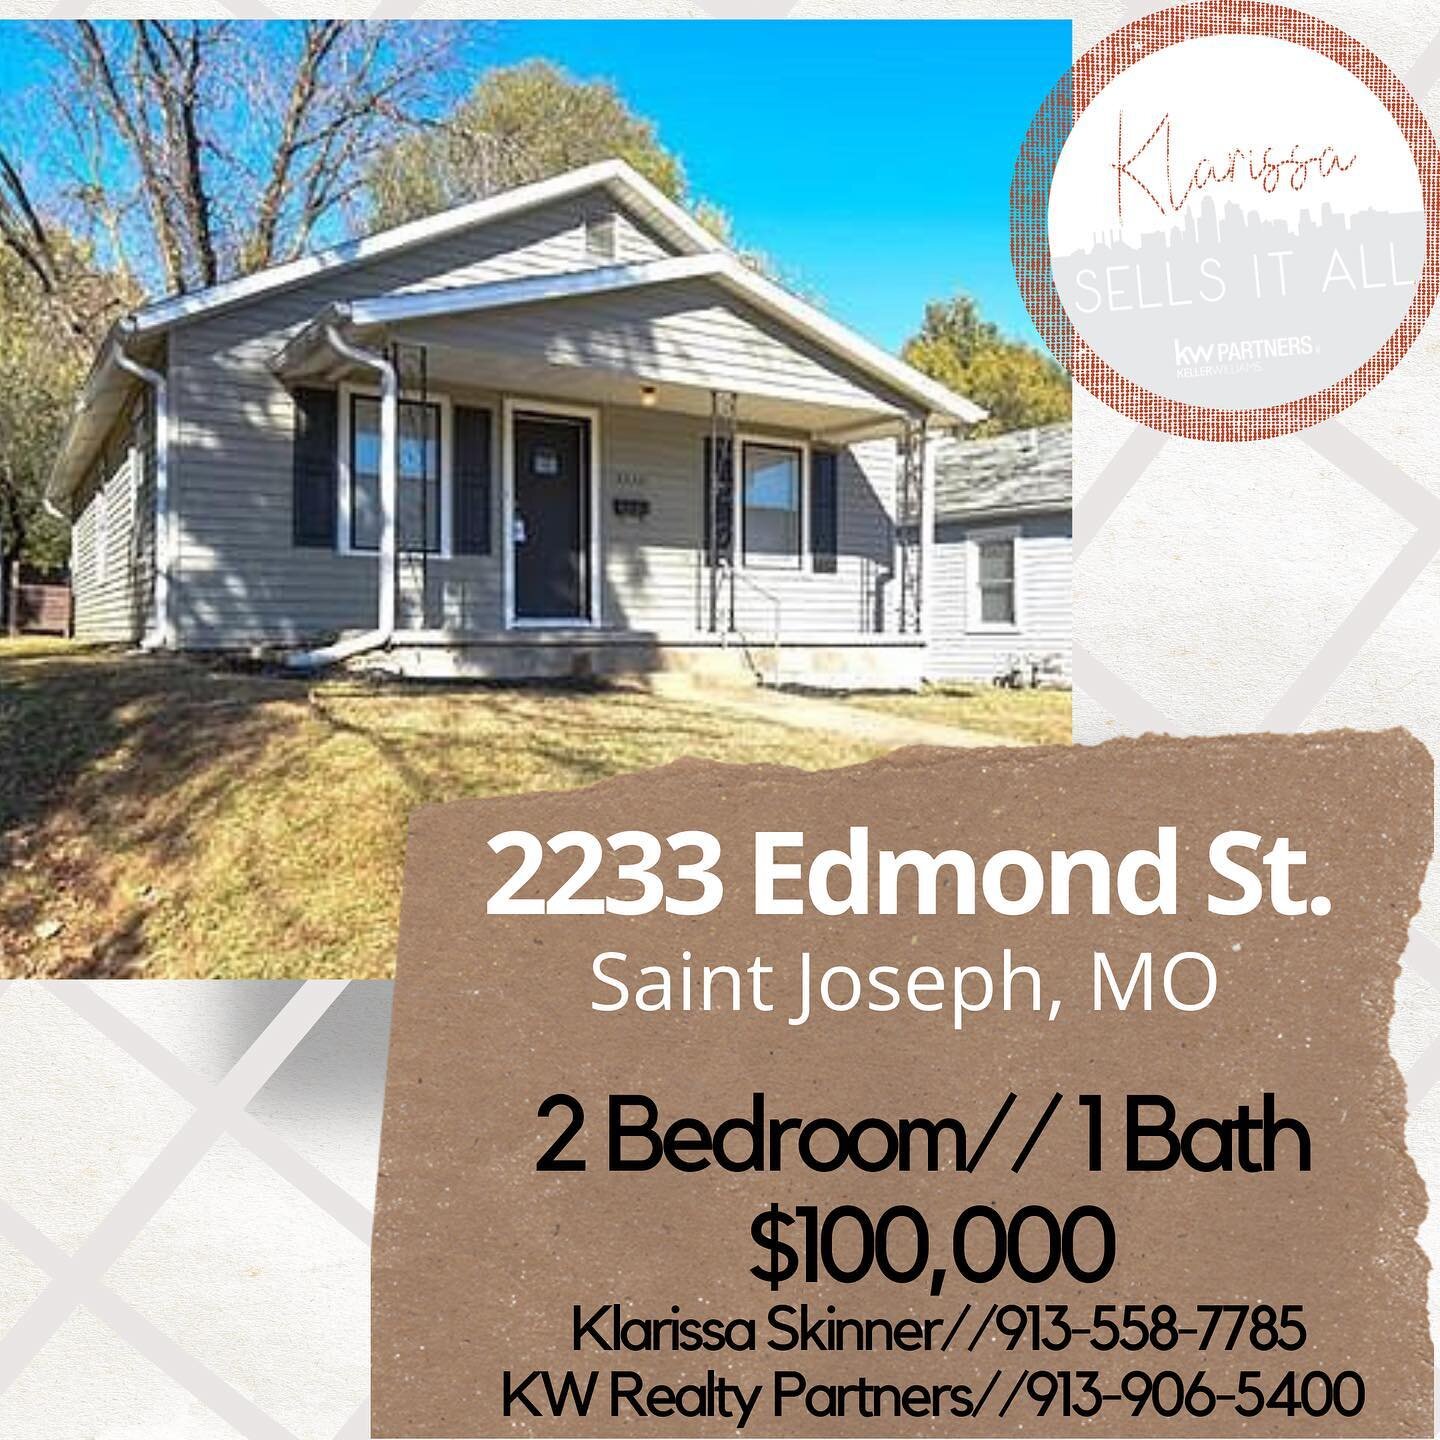 ✨Just Listed✨
And SO perfect for the Northland Investor 🤑

💰 2 Bedroom/ 1 Bath
💰So cute with tons of updates
💰Full basement 

 #kansascity #leessummit #realestate #KellerWilliams #klarissasellsitall #johnsoncountyrealestate #johnsoncountyks #real